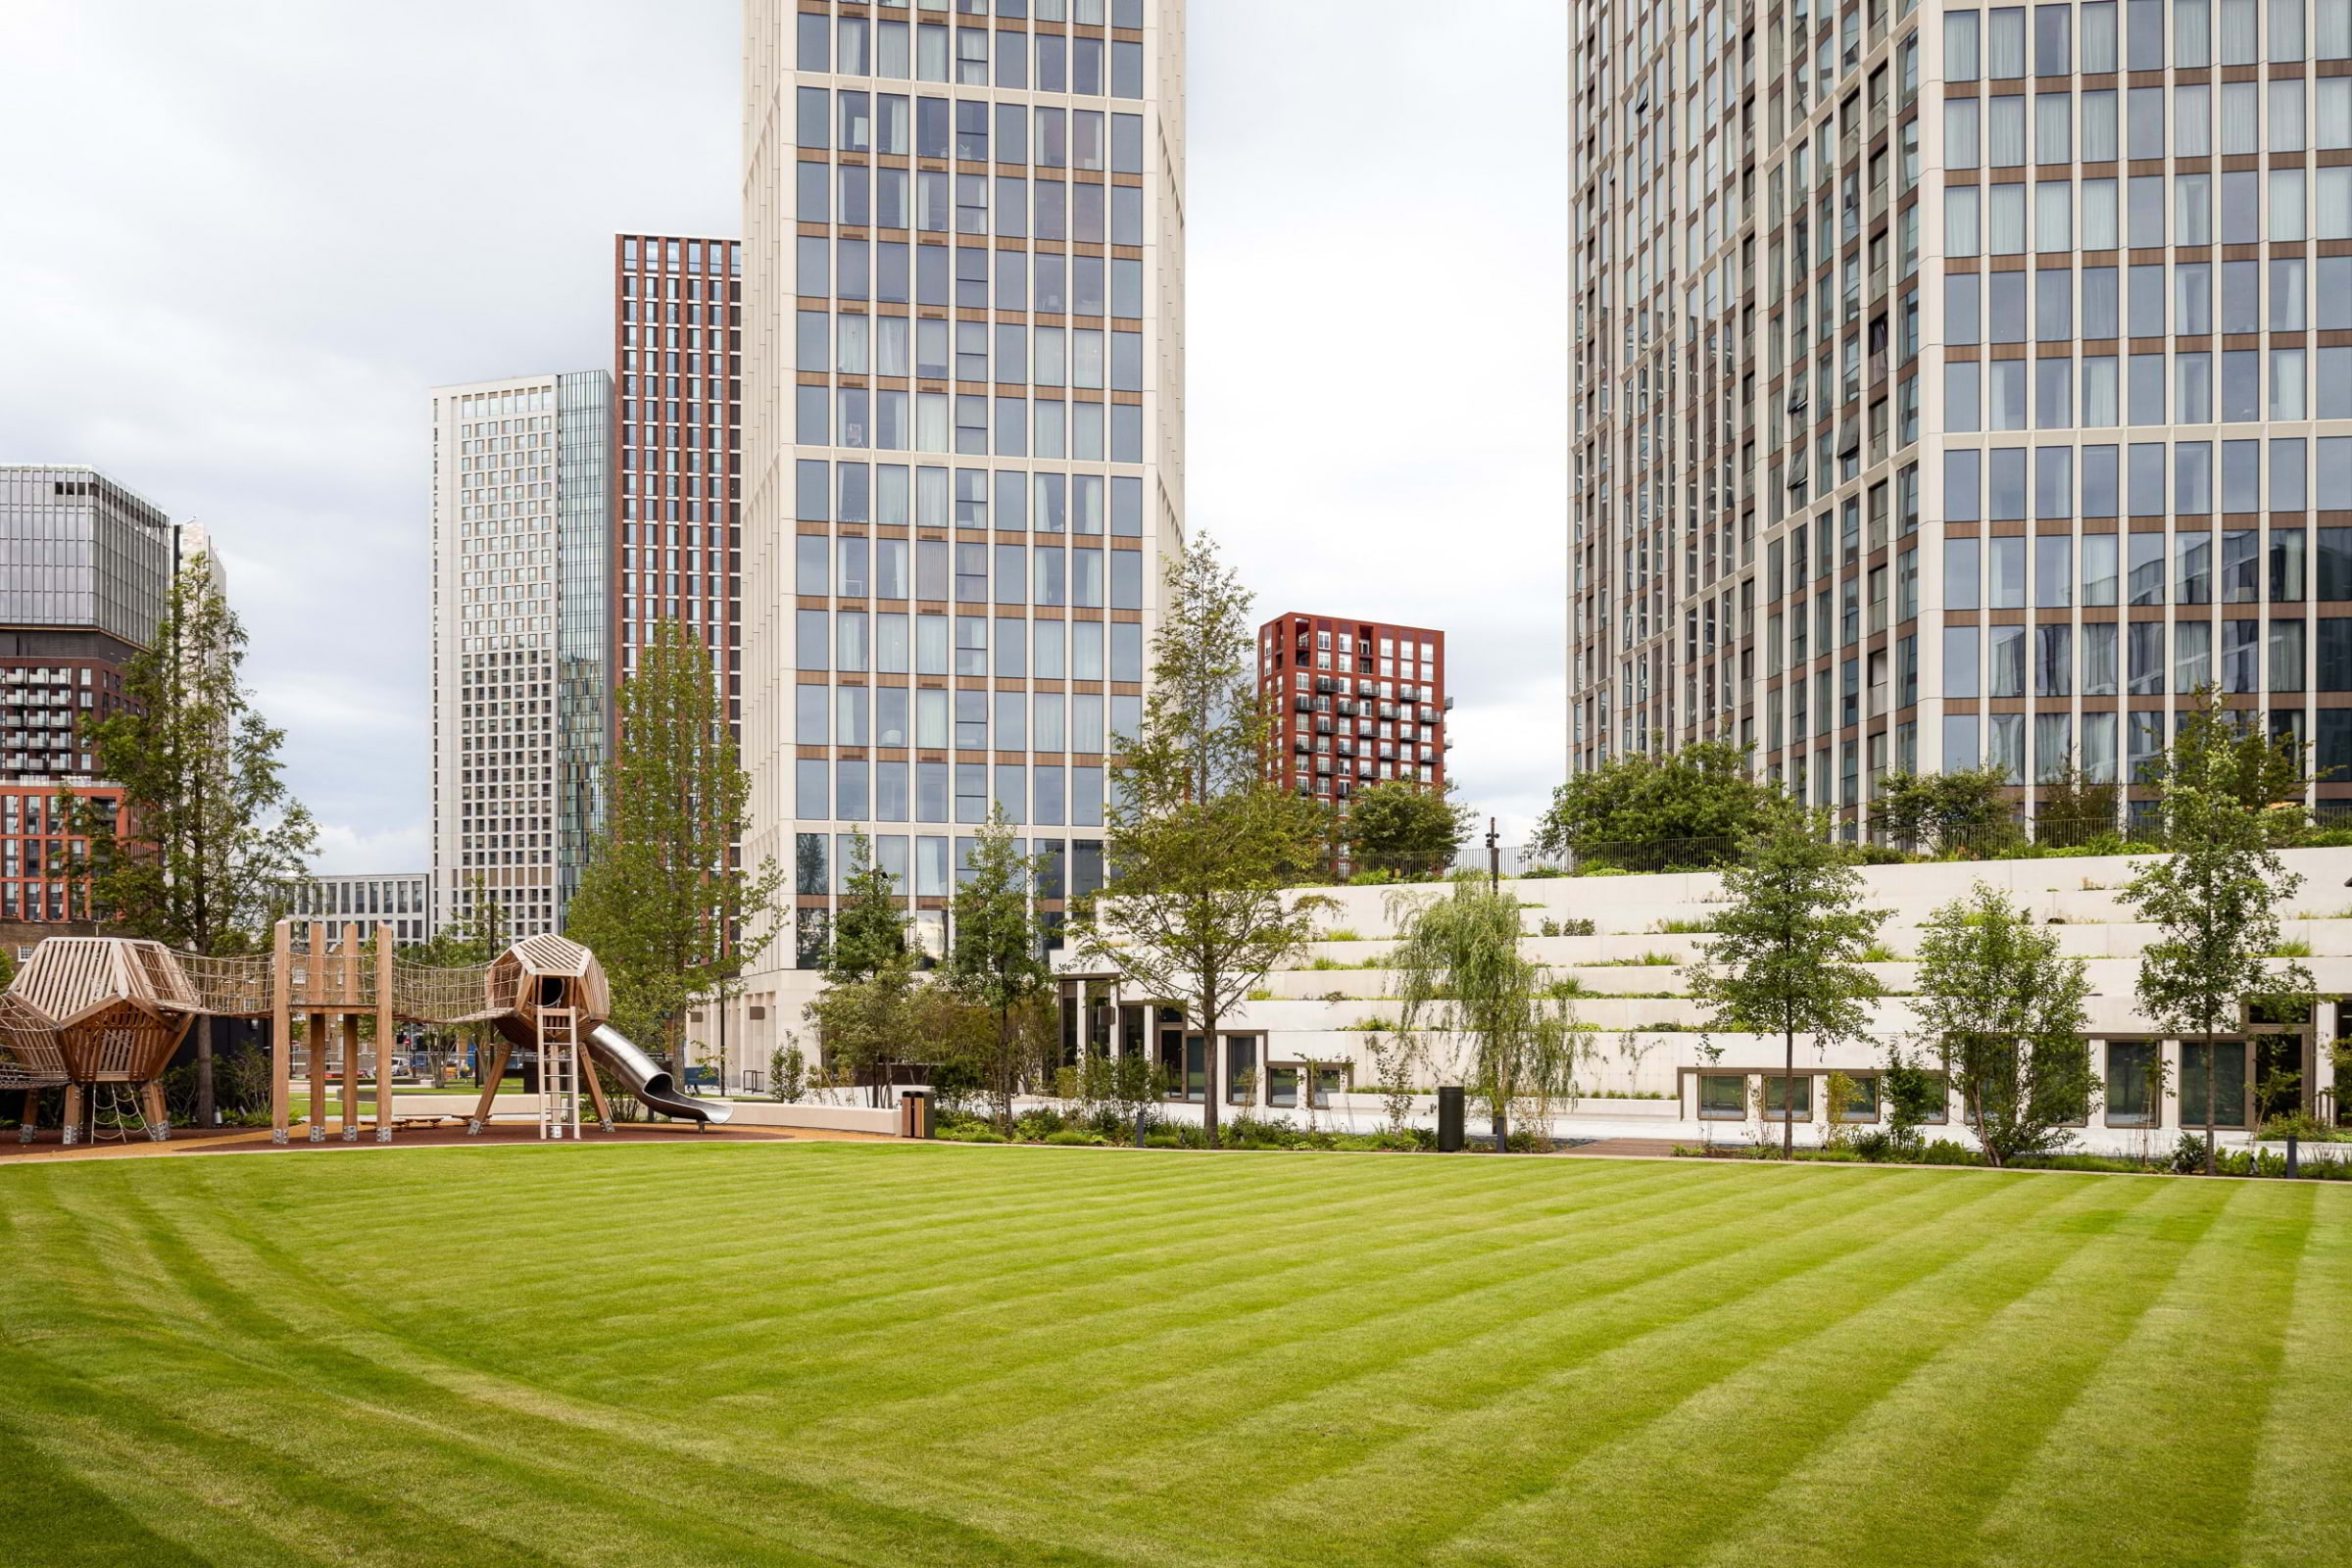 There's a new public park in London and it's shaping up to be a beaut